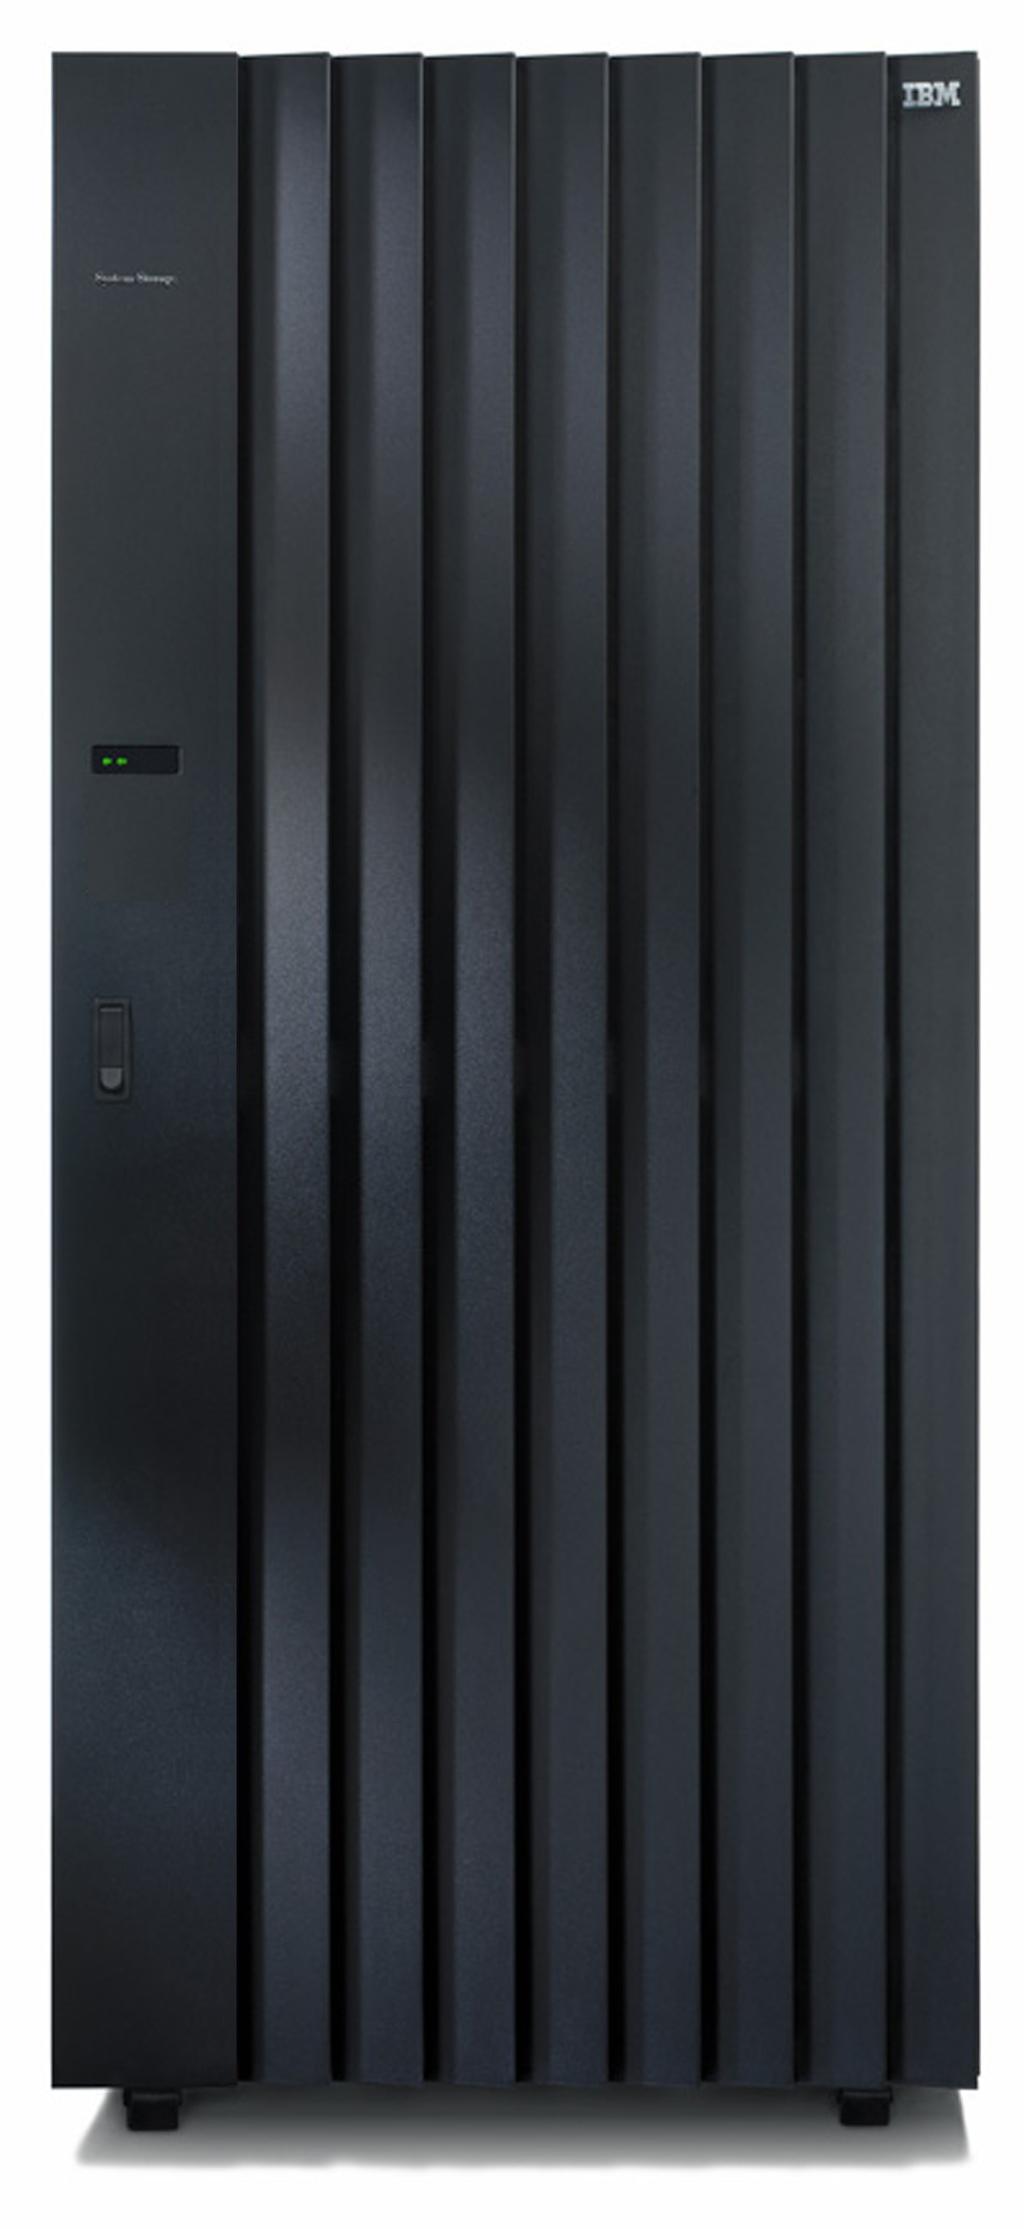 DS8000 family models Two base models with scalable controllers and capacity DS8700 POWER6 controllers (2-way and 4-way) 4 Gb/s and 2 Gb/s host and